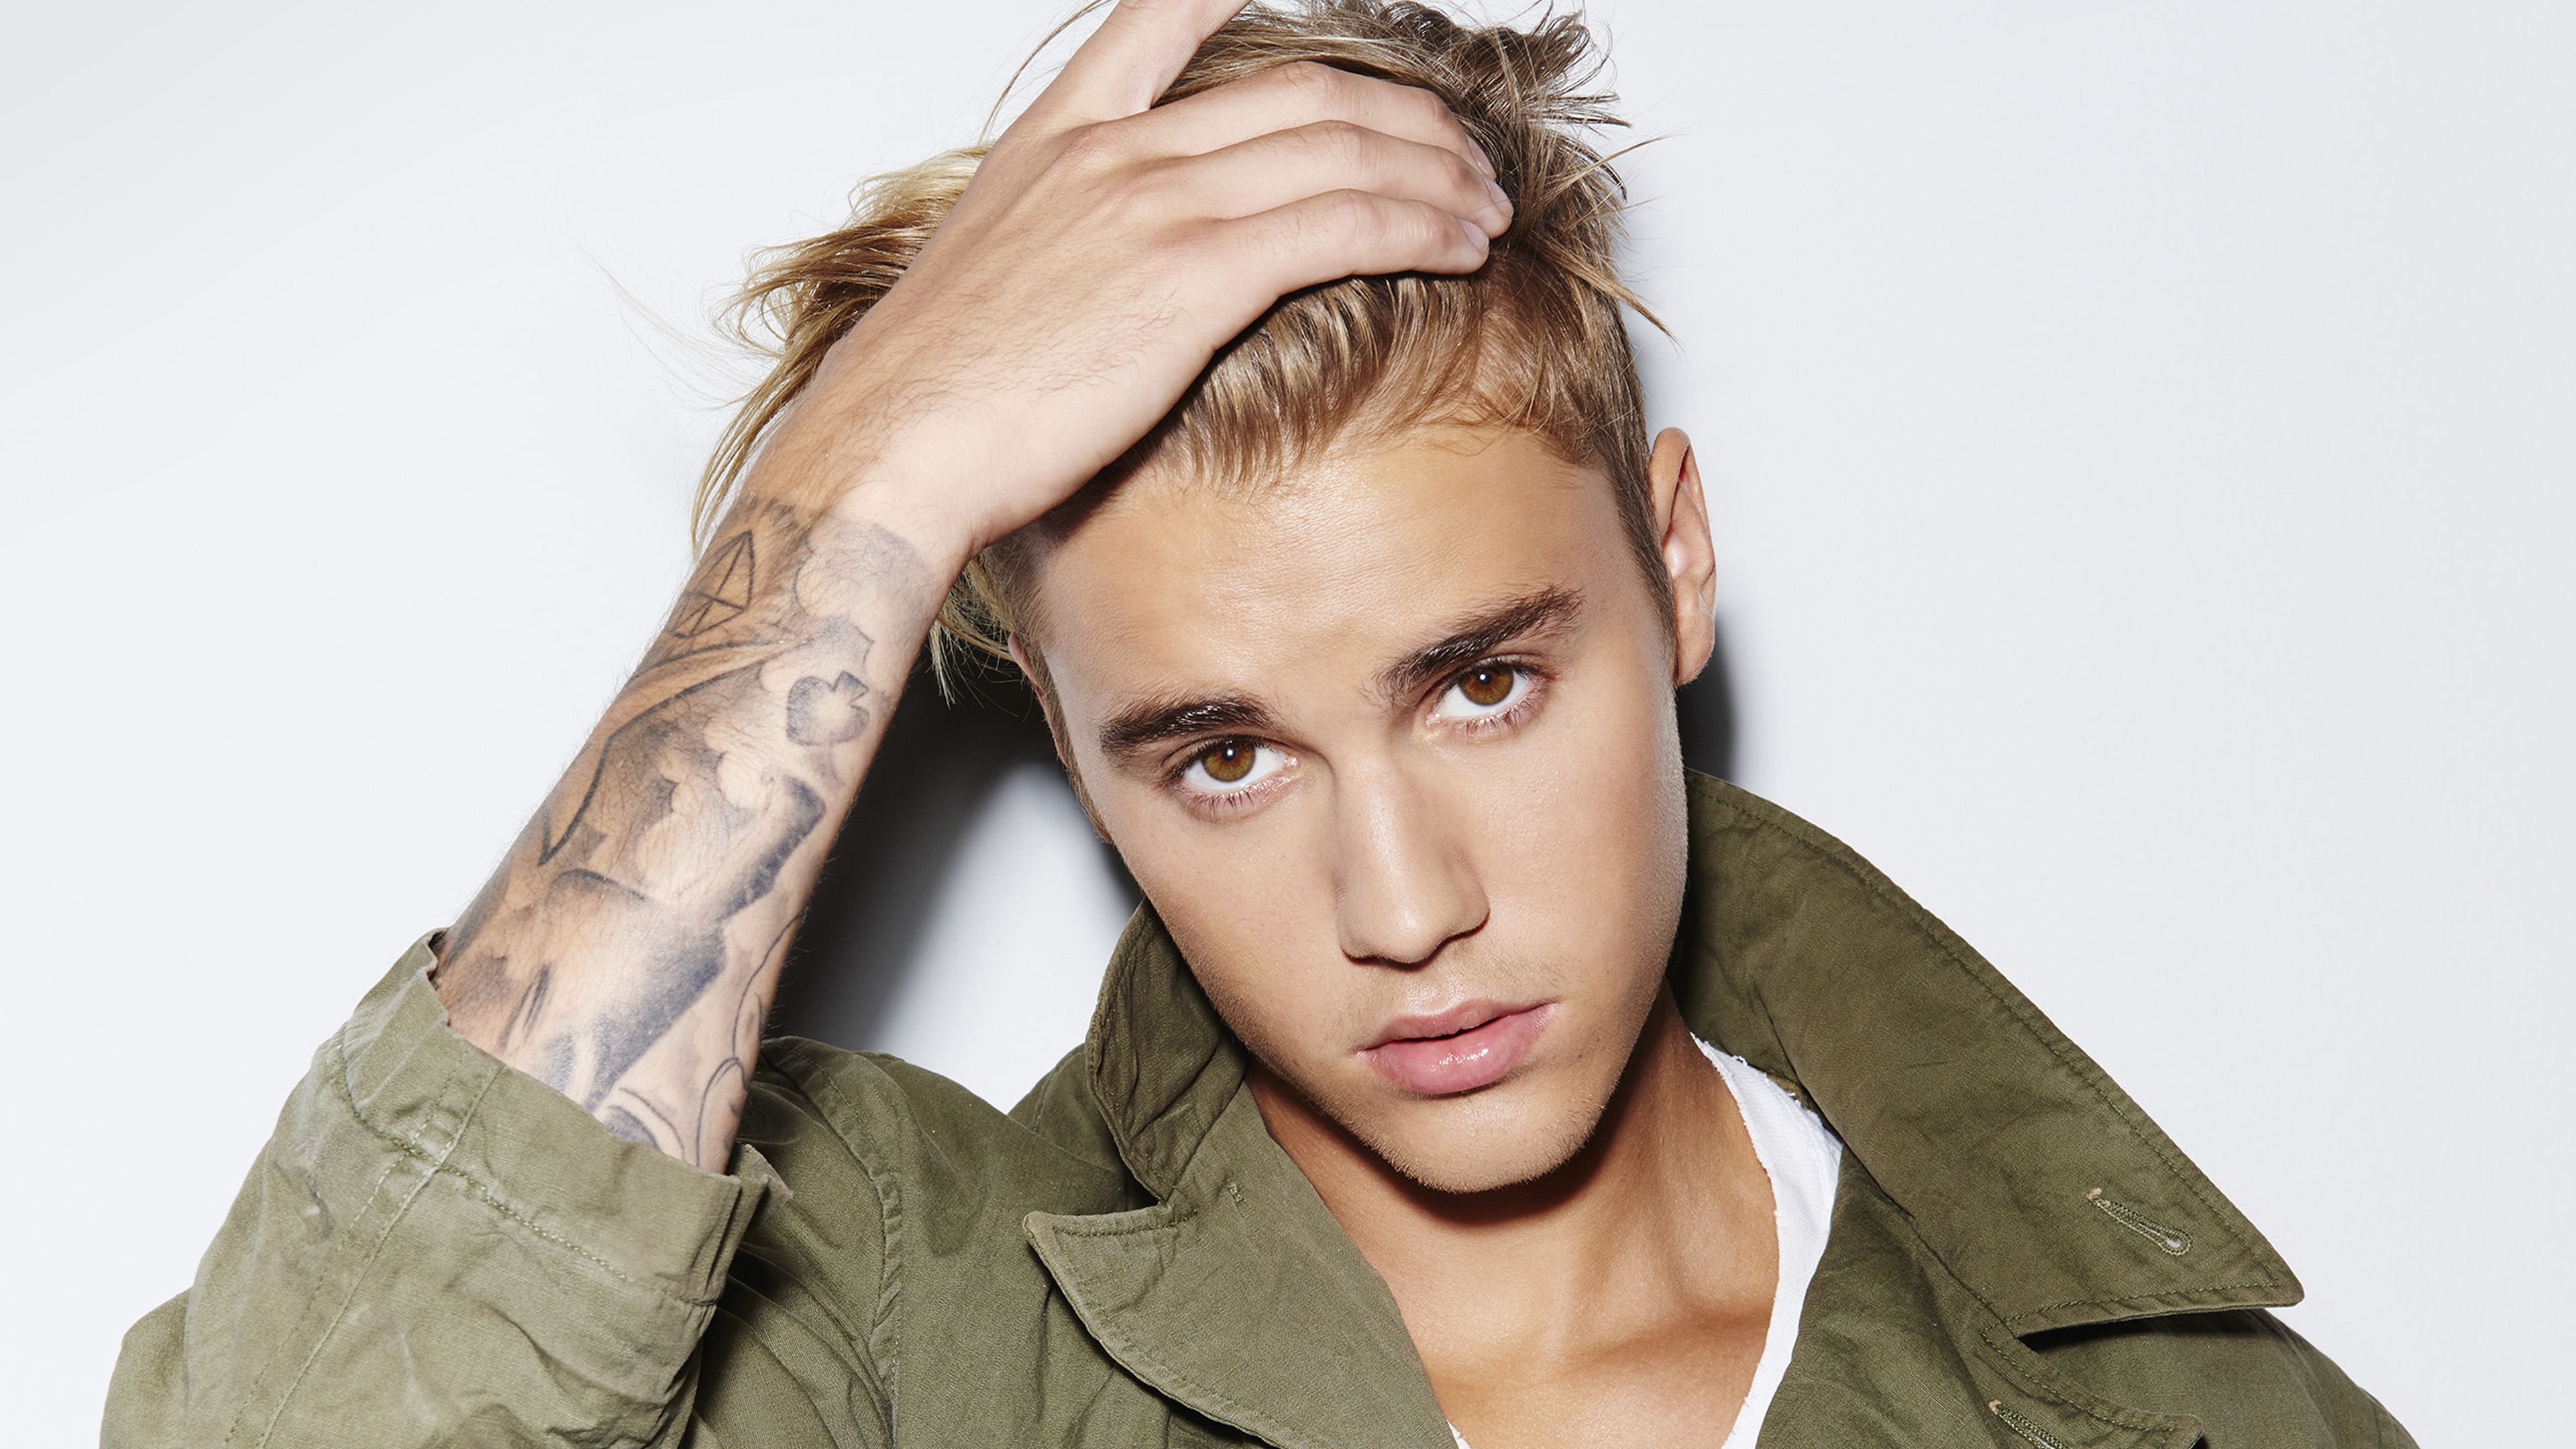 Bieber 4K wallpaper for your desktop or mobile screen free and easy to download